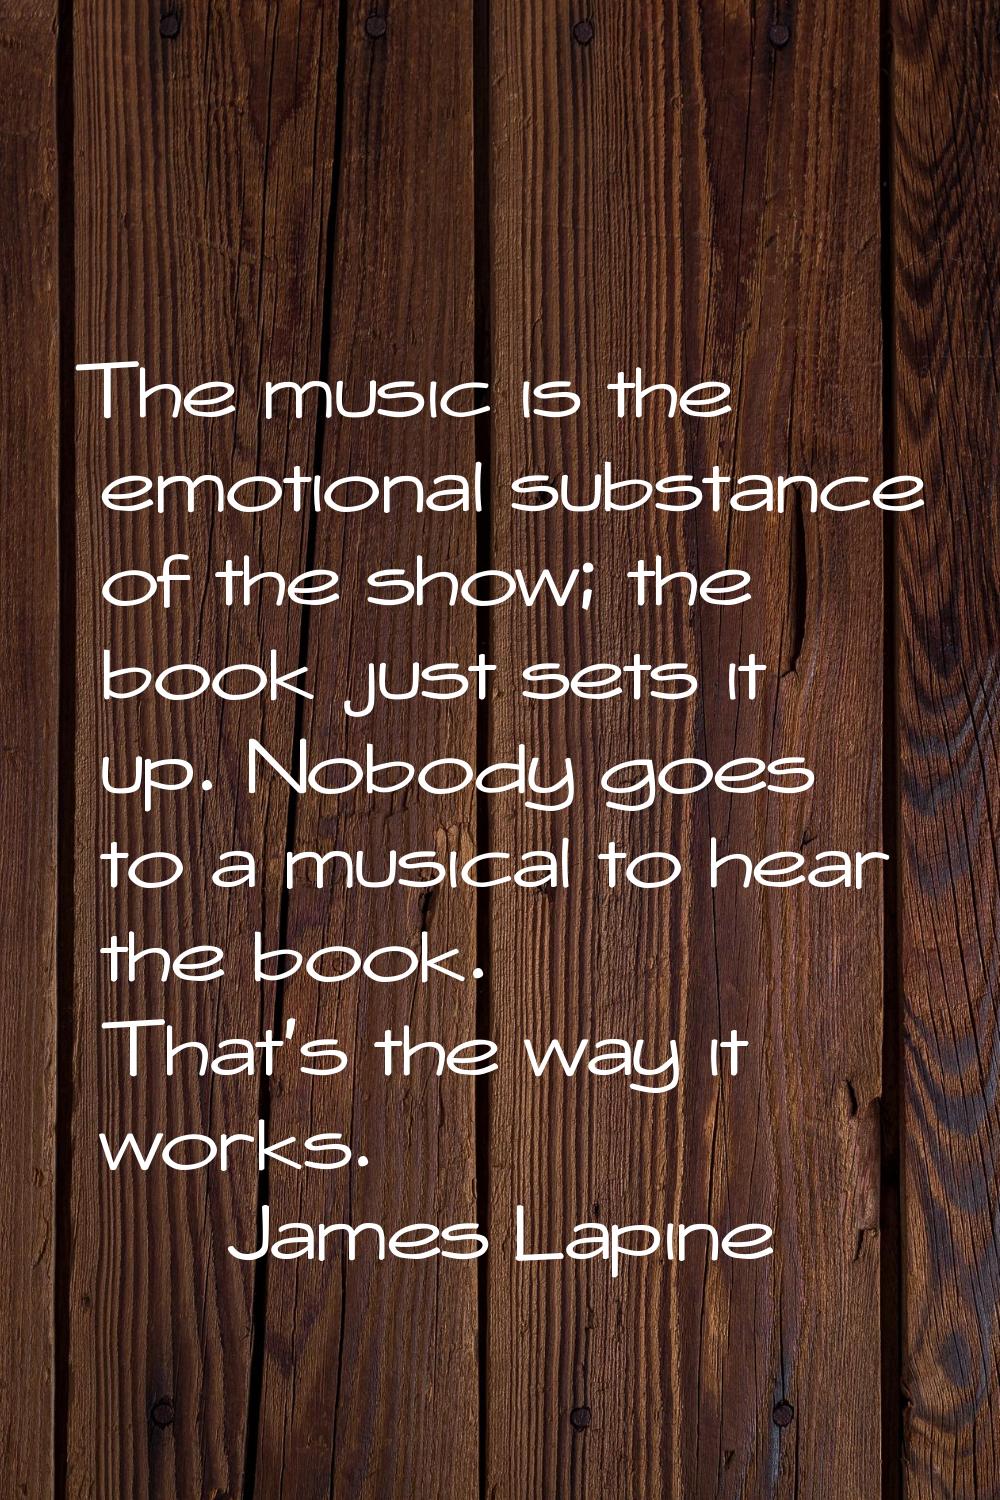 The music is the emotional substance of the show; the book just sets it up. Nobody goes to a musica